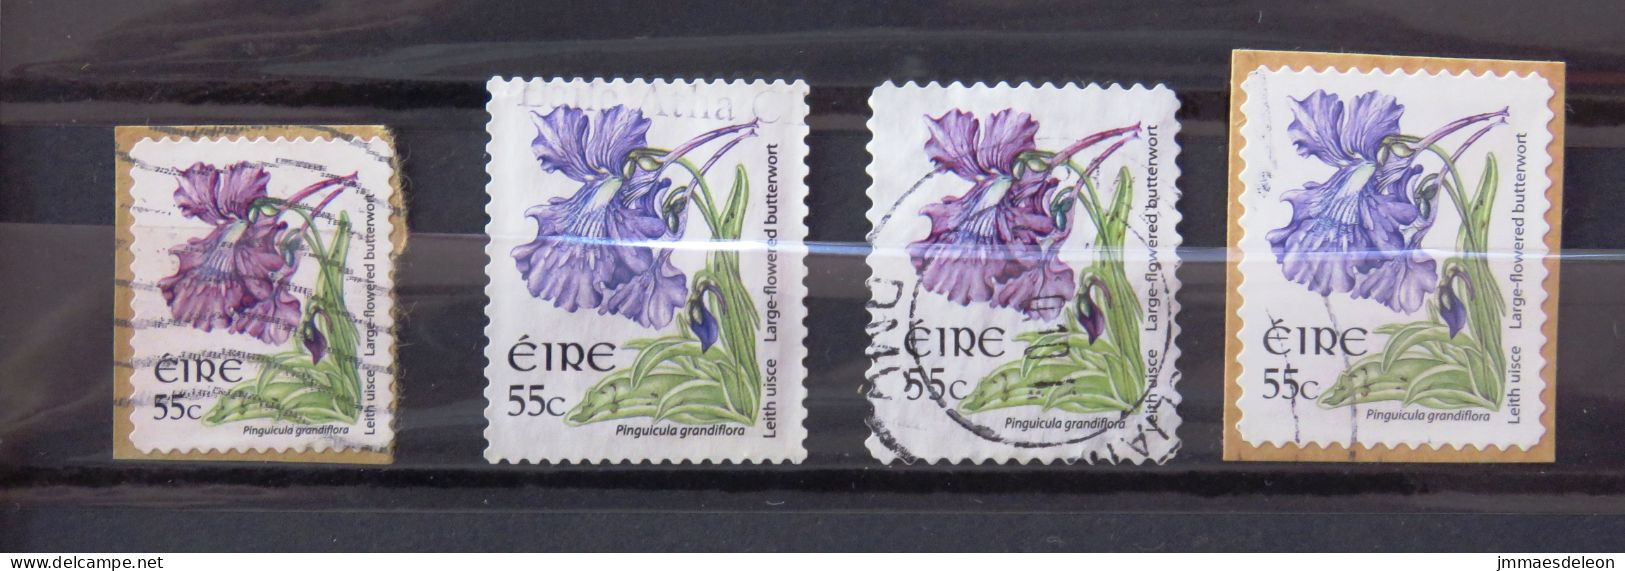 Ireland 2007 Flowers - 3 Different, 1 Smeller Sie, 2 Different Perforations, One Different Color - Gebraucht